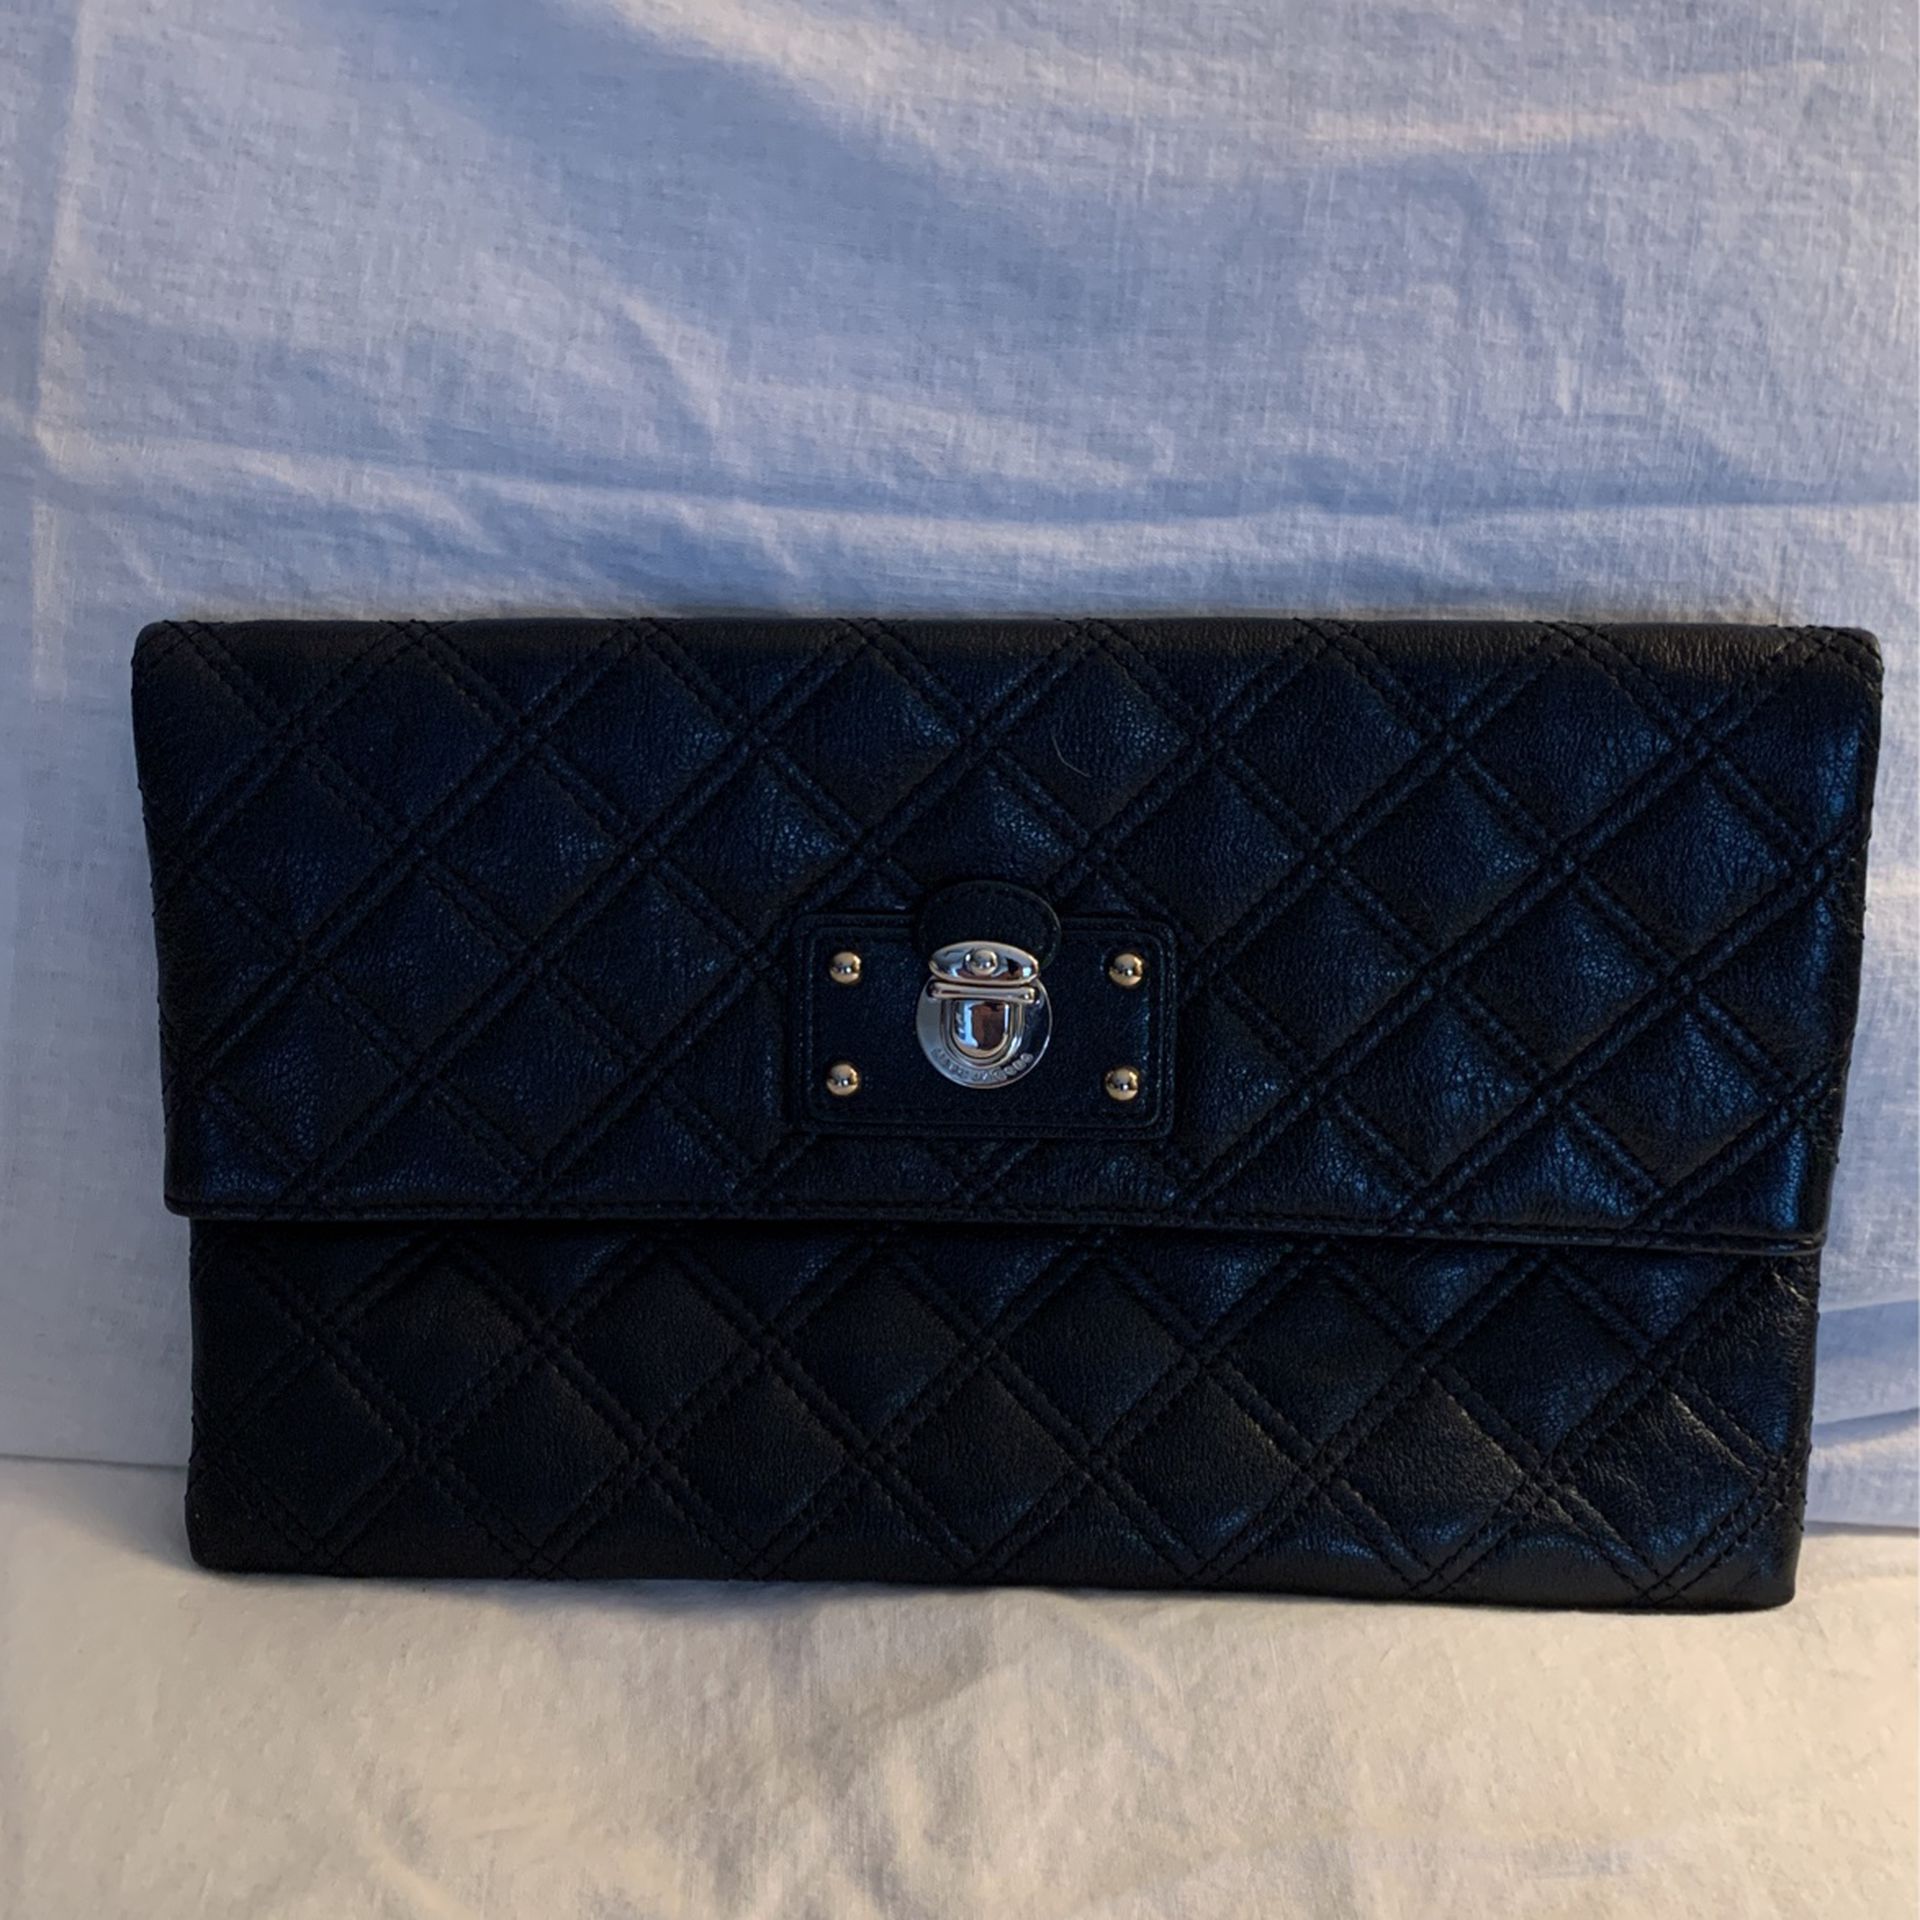 Marc Jacobs Black Quilted Leather Clutch